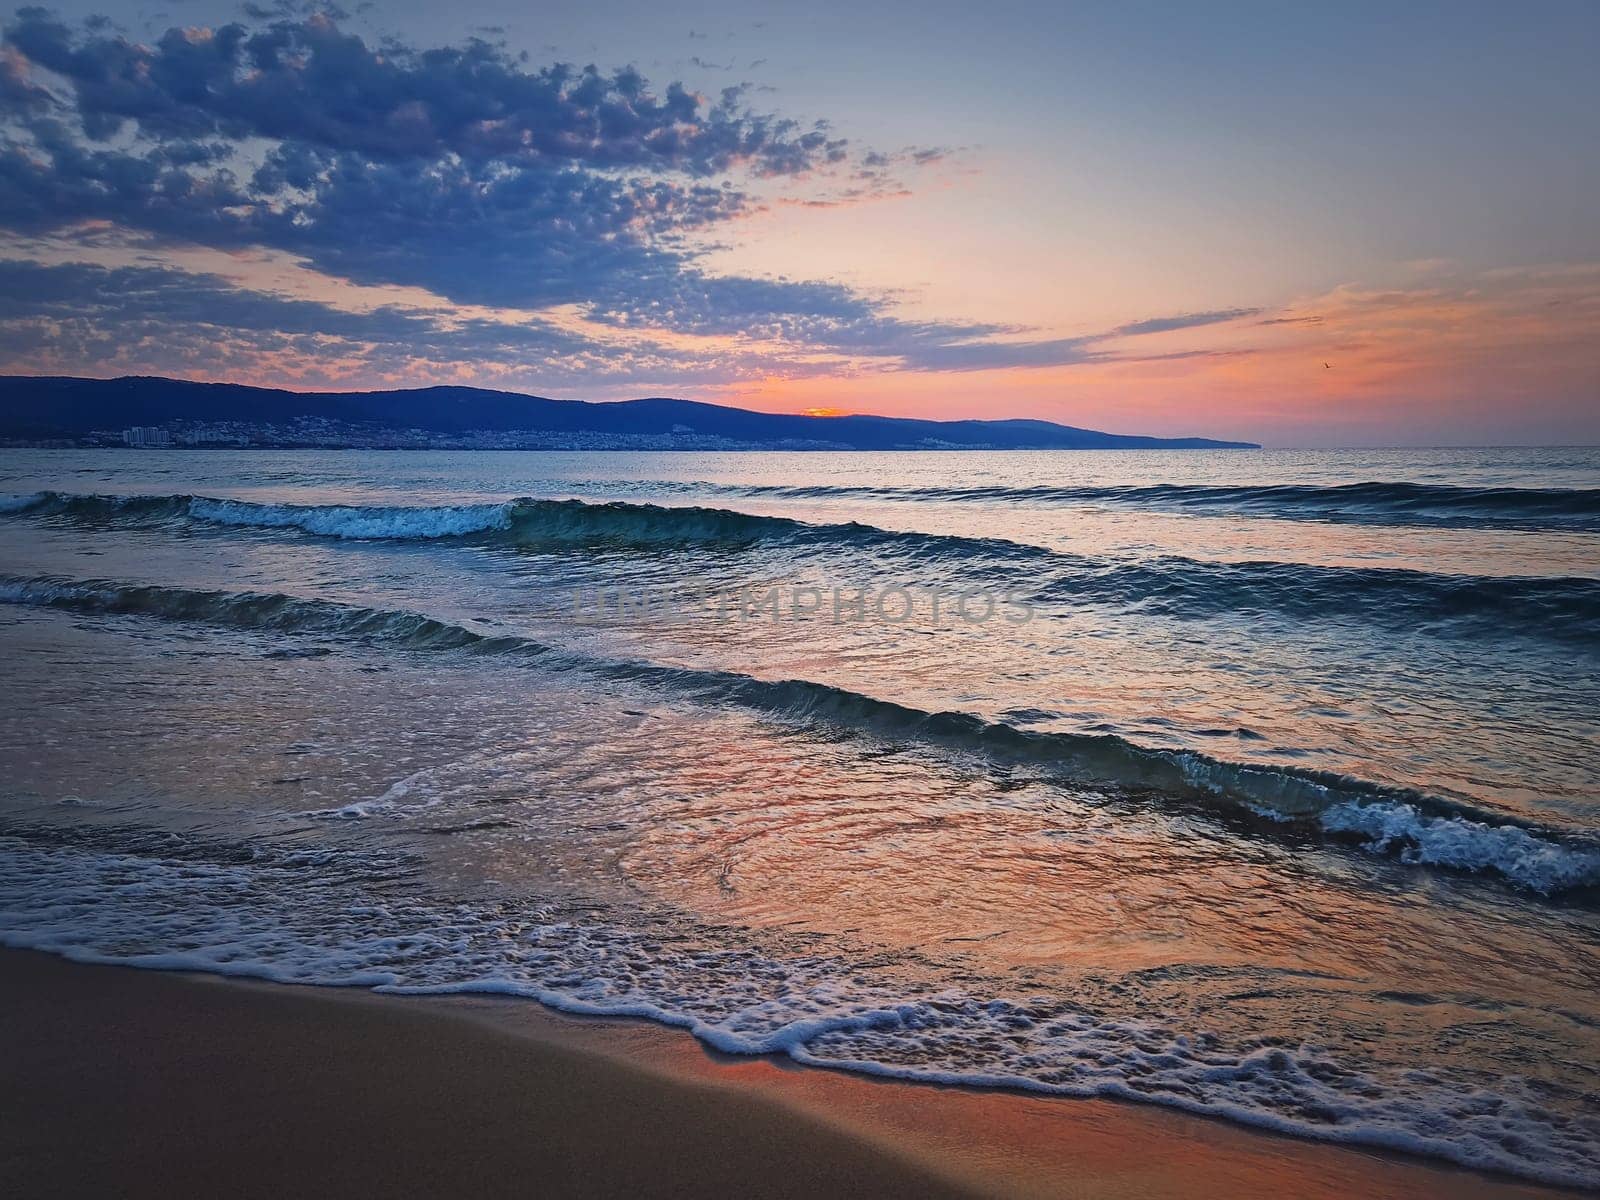 Sunrise at the sea with foamy waves on the sand and colorful sky at the horizon. Summer and travel background, Sunny Beach coastline in Bulgaria